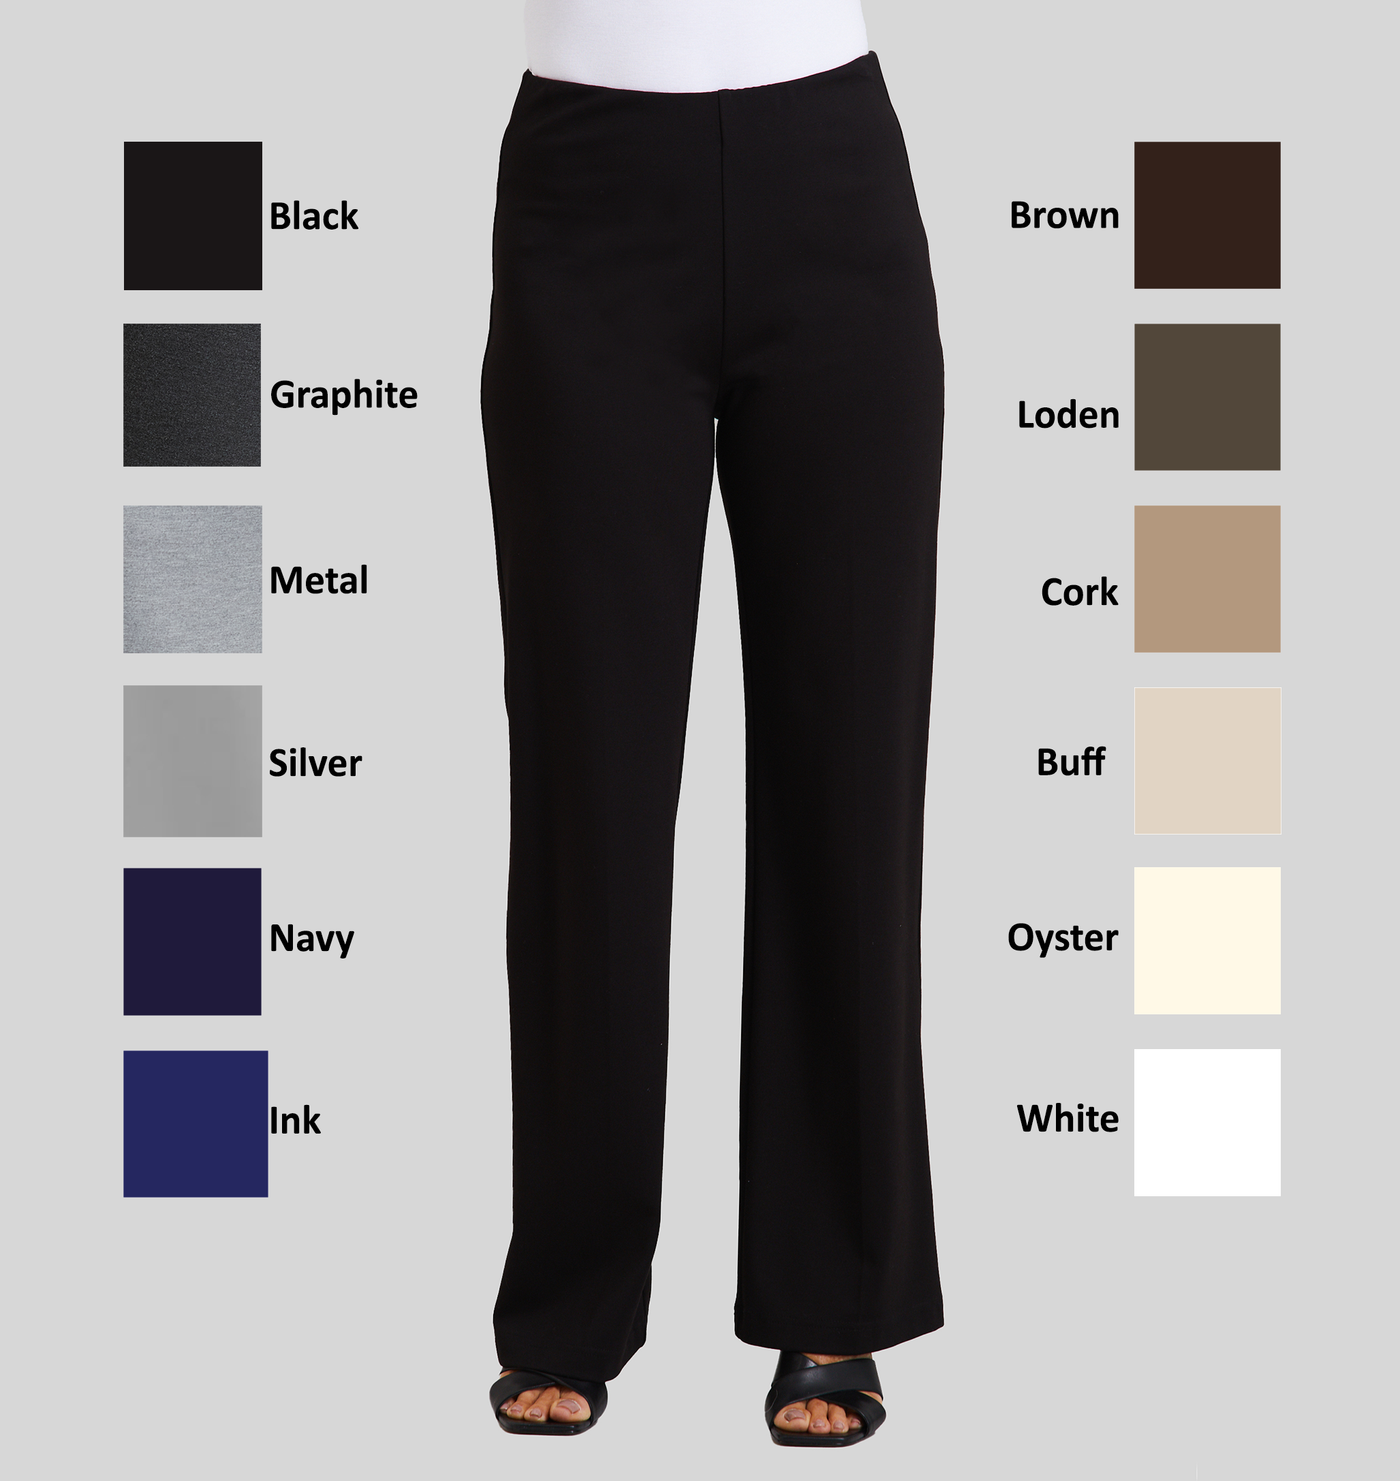 Where Can I Find the Perfect Pair of Black Pants? - The New York Times